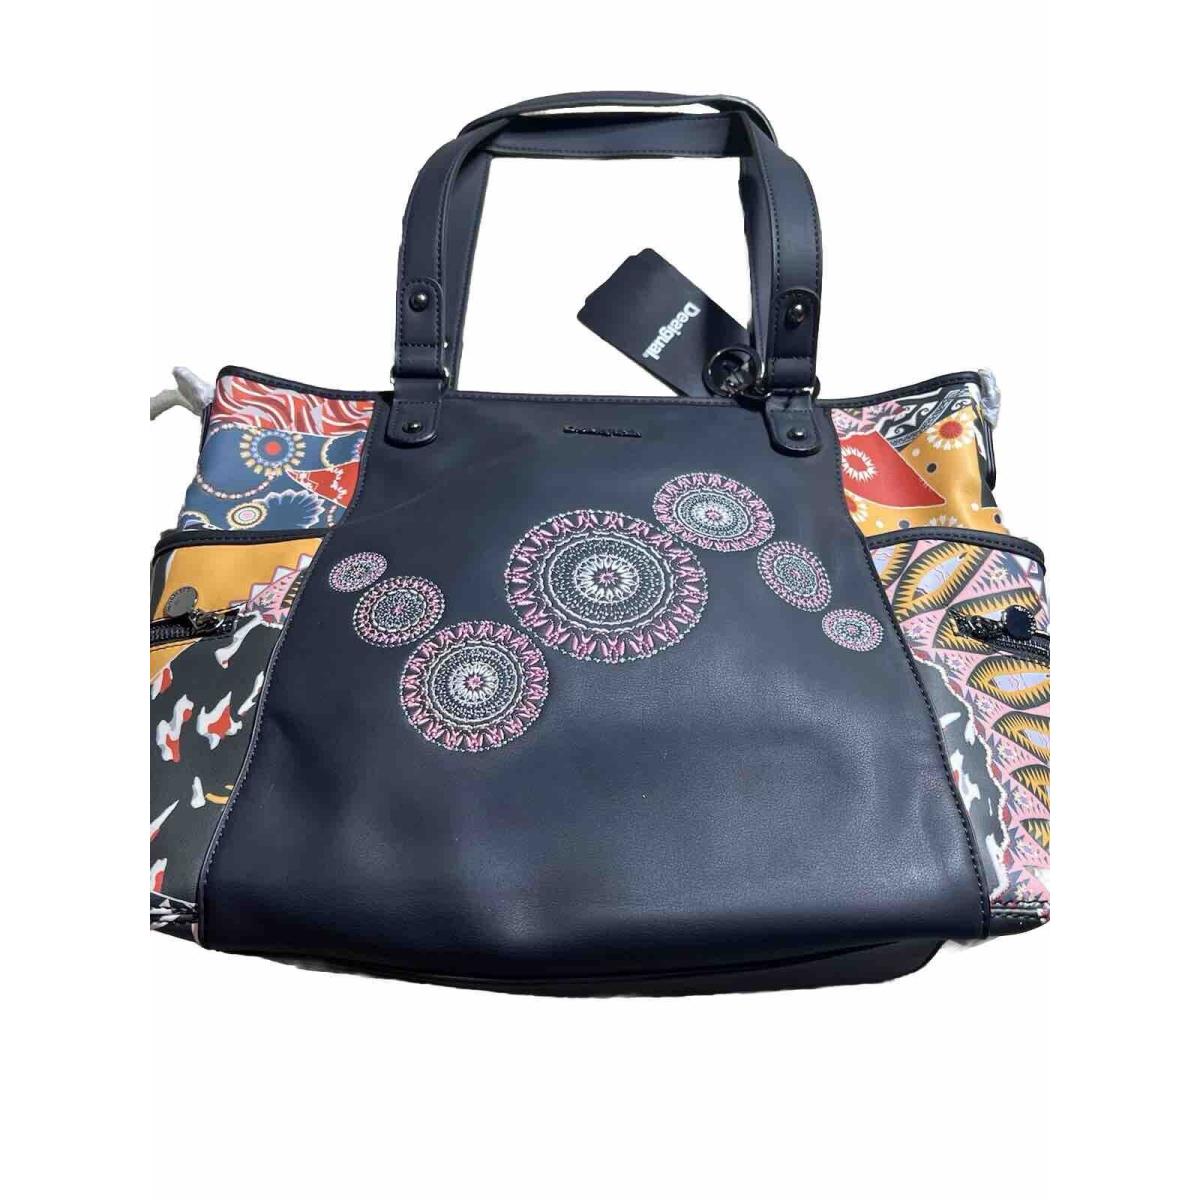 Desigual Purse Bag Guernica Maxton Large Embroidered Crossbody Shoulder Hand